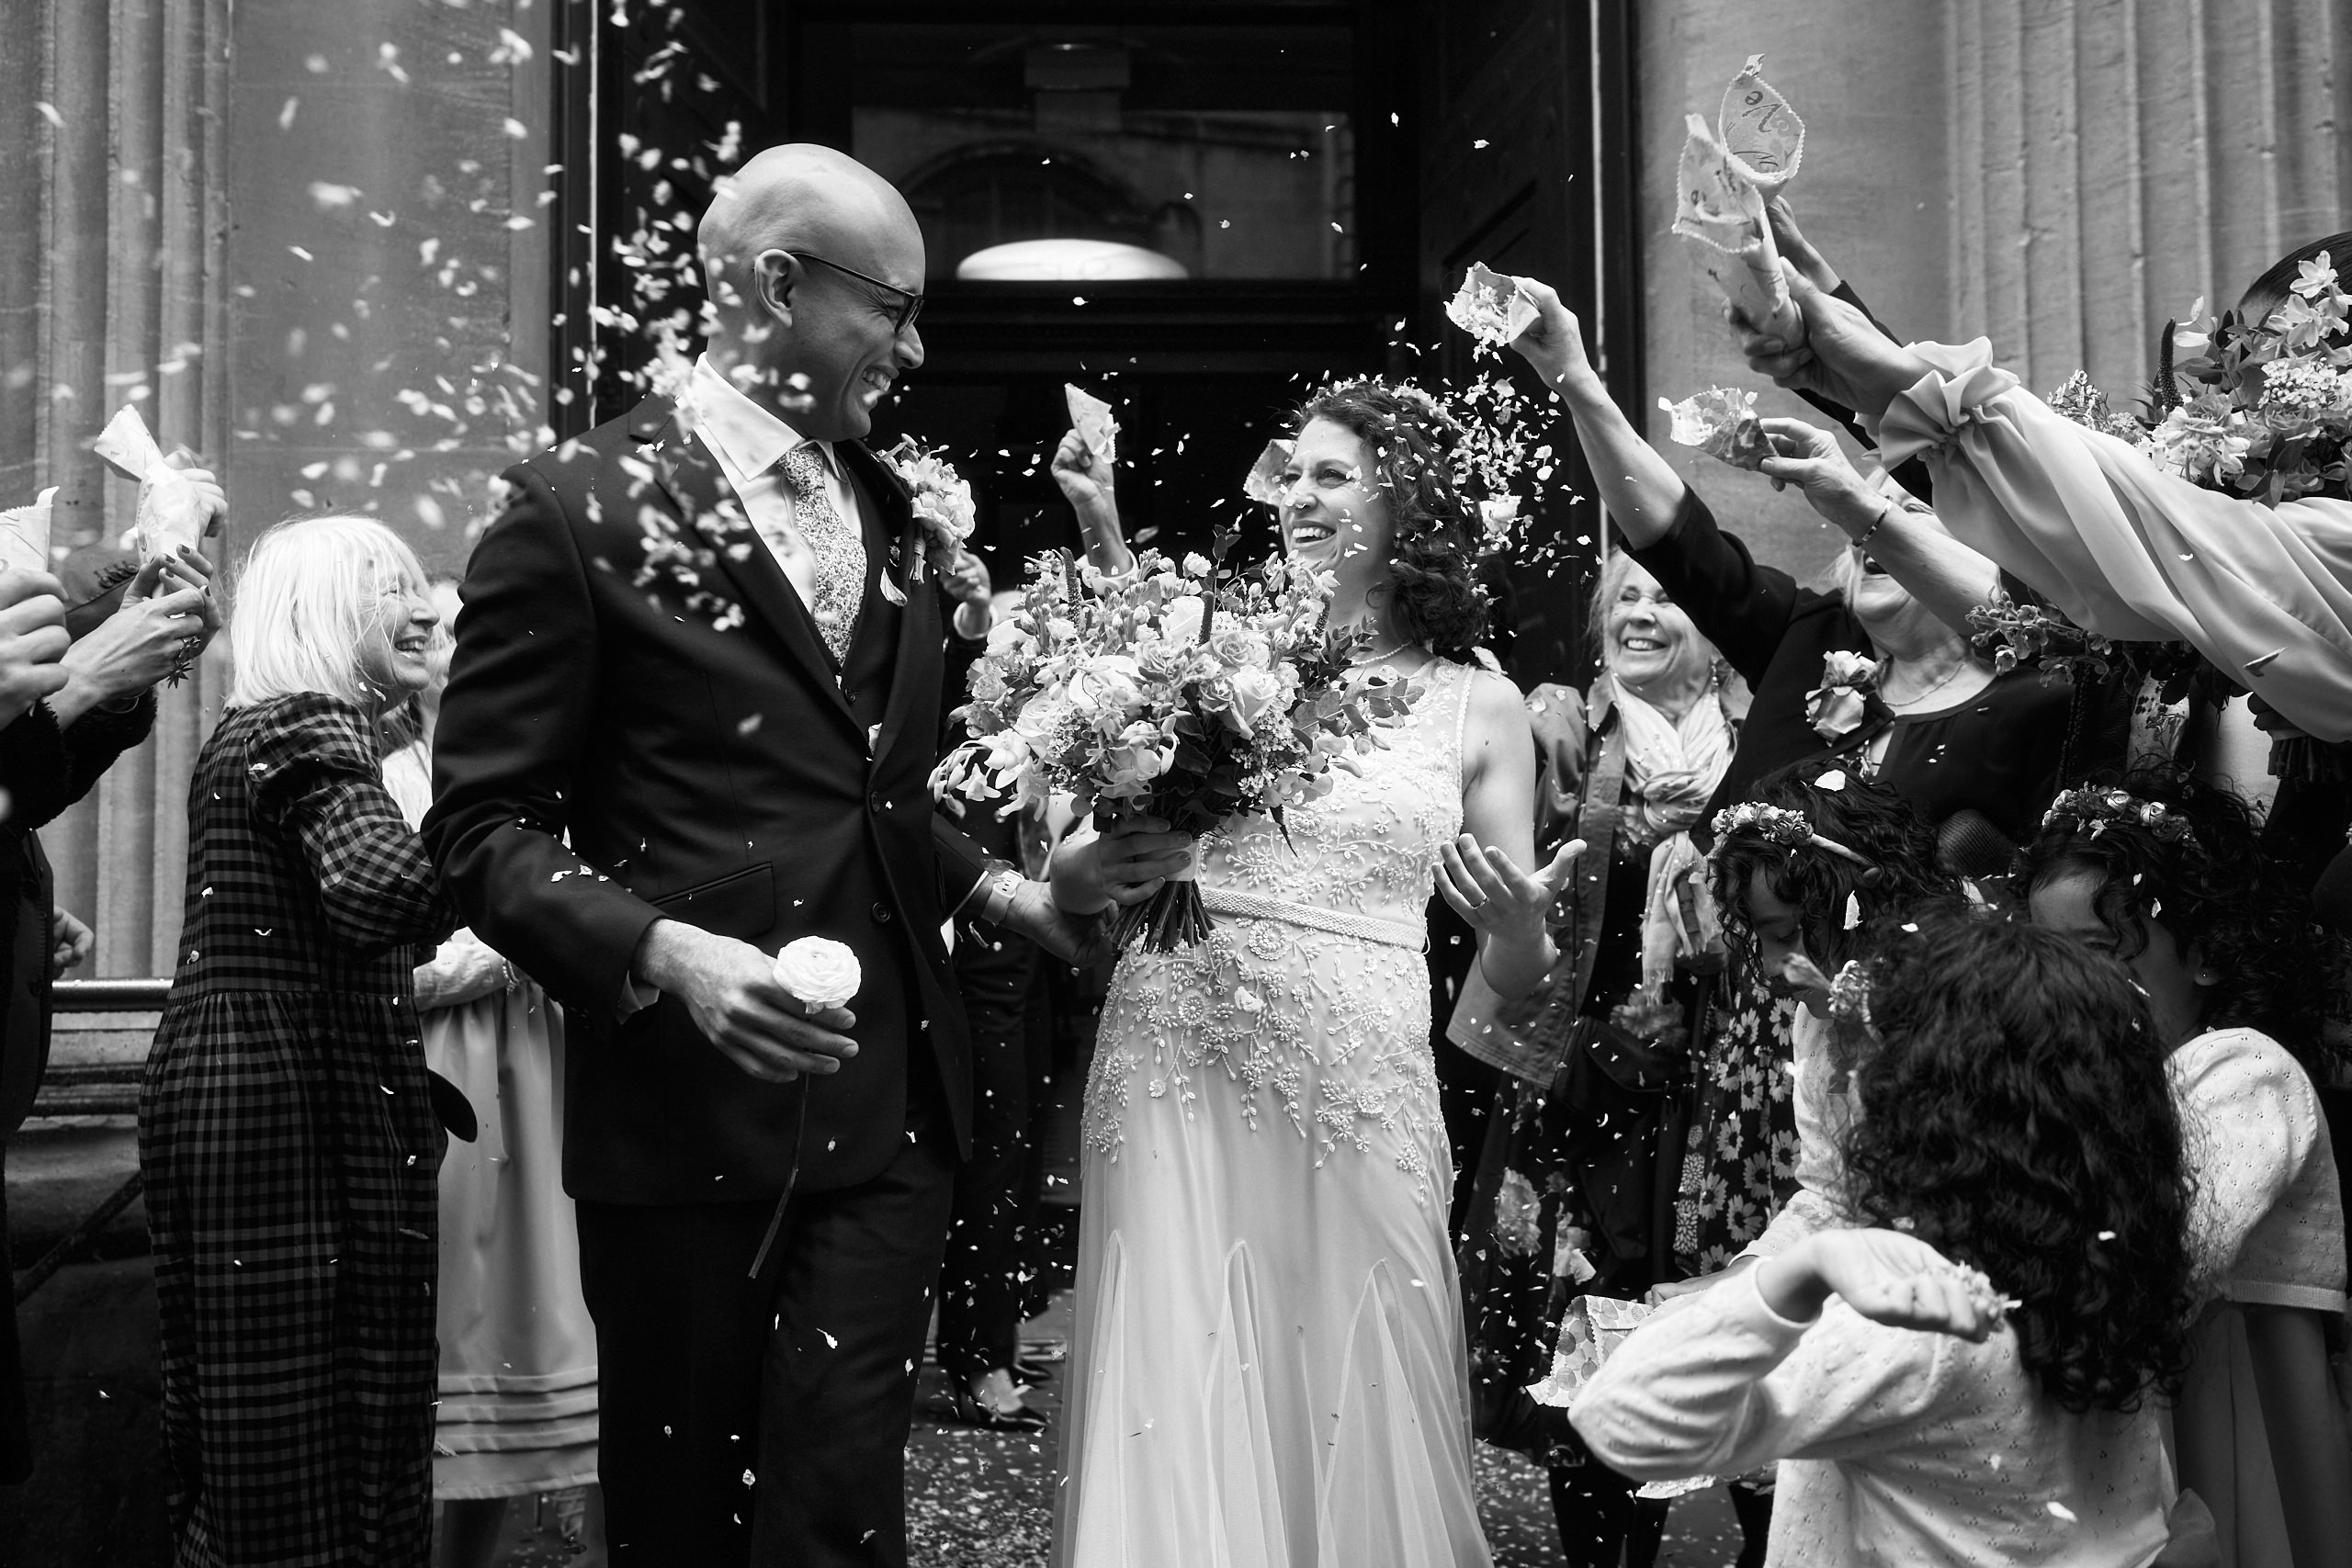 A black and white picture of a bride and groom getting showered with confetti.